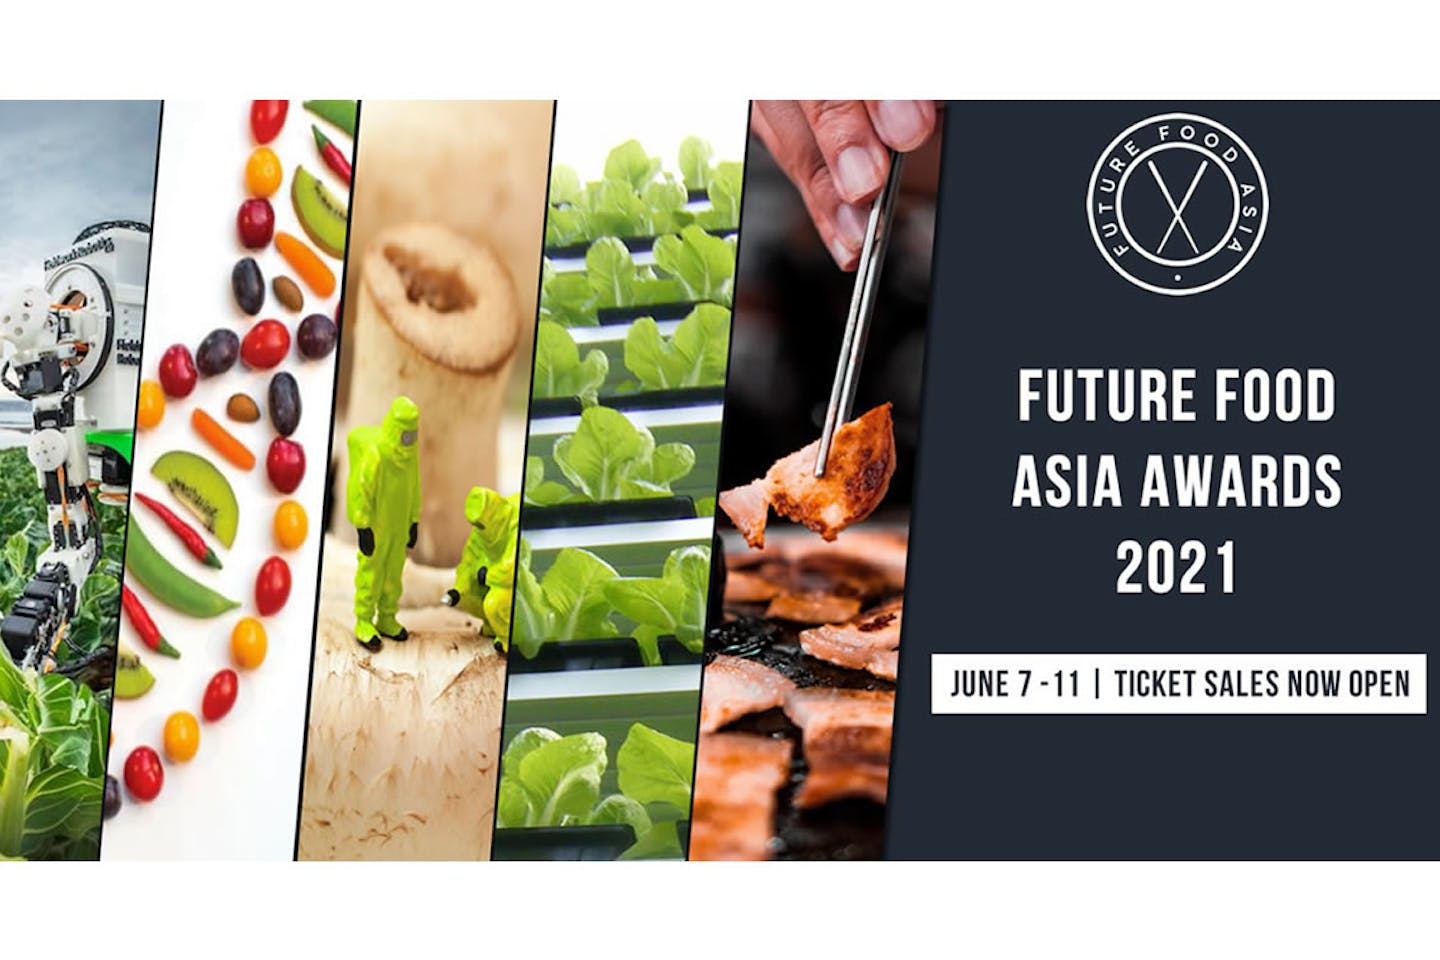 Cargill and Thai Wah announce their respective prizes to be awarded at Future Food Asia 2021